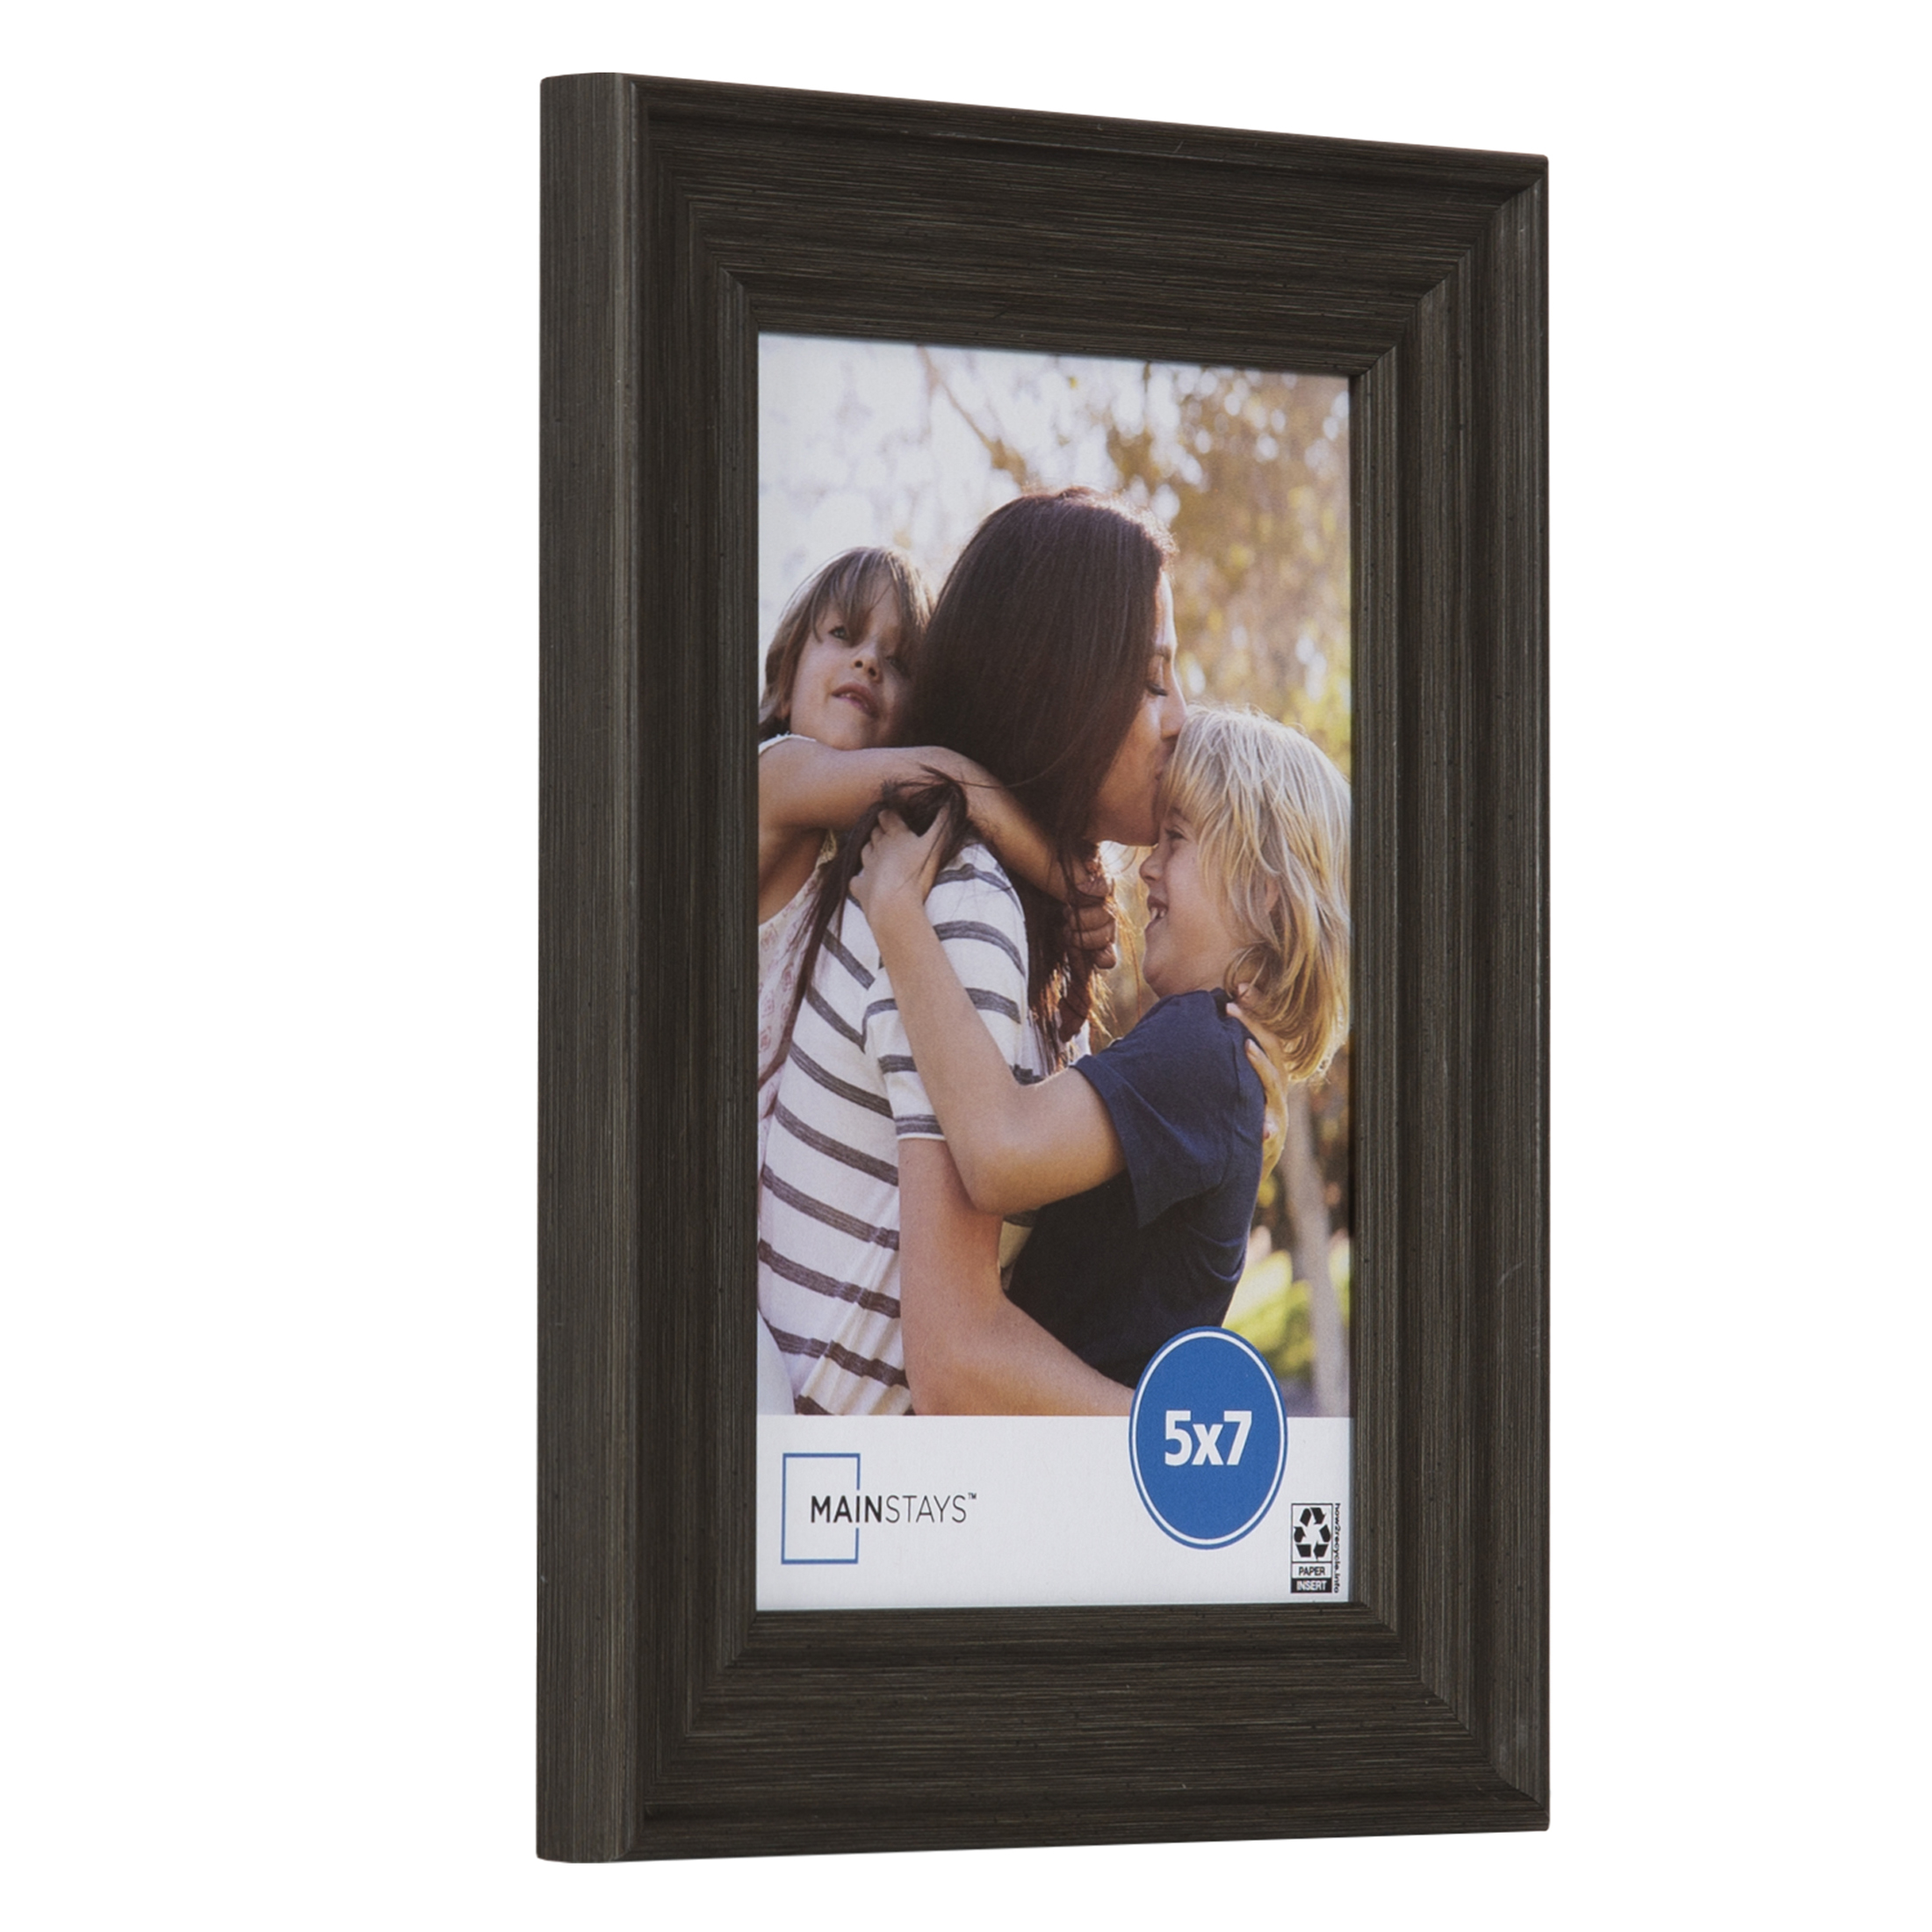 Mainstays 5x7 Dark Gray Decorative Tabletop Picture Frame - image 4 of 11